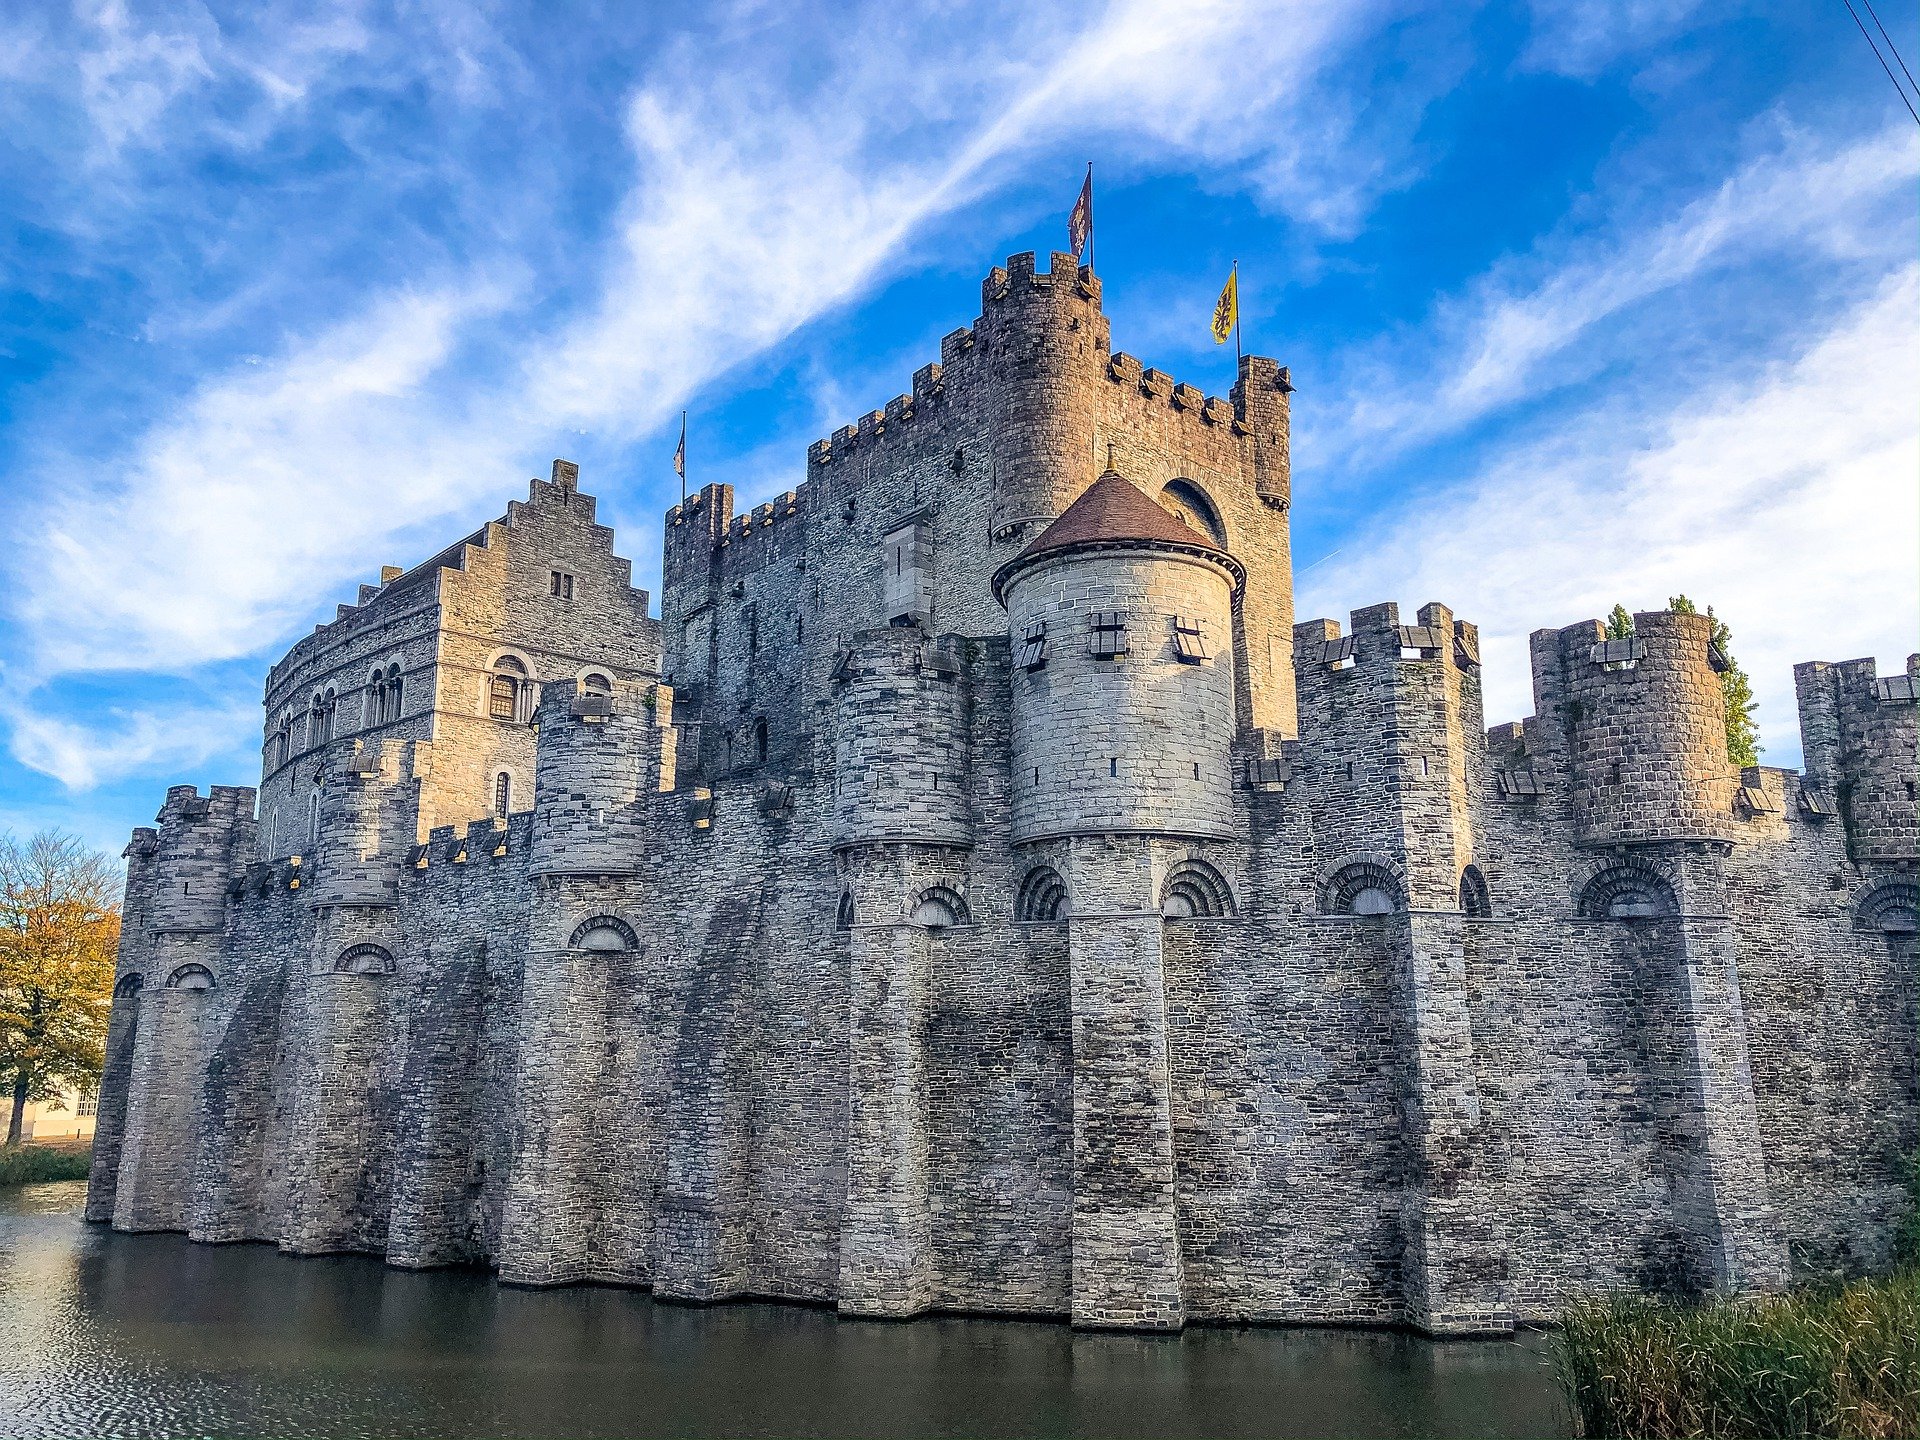 A grey medieval castle made from stone by the water in Belgium